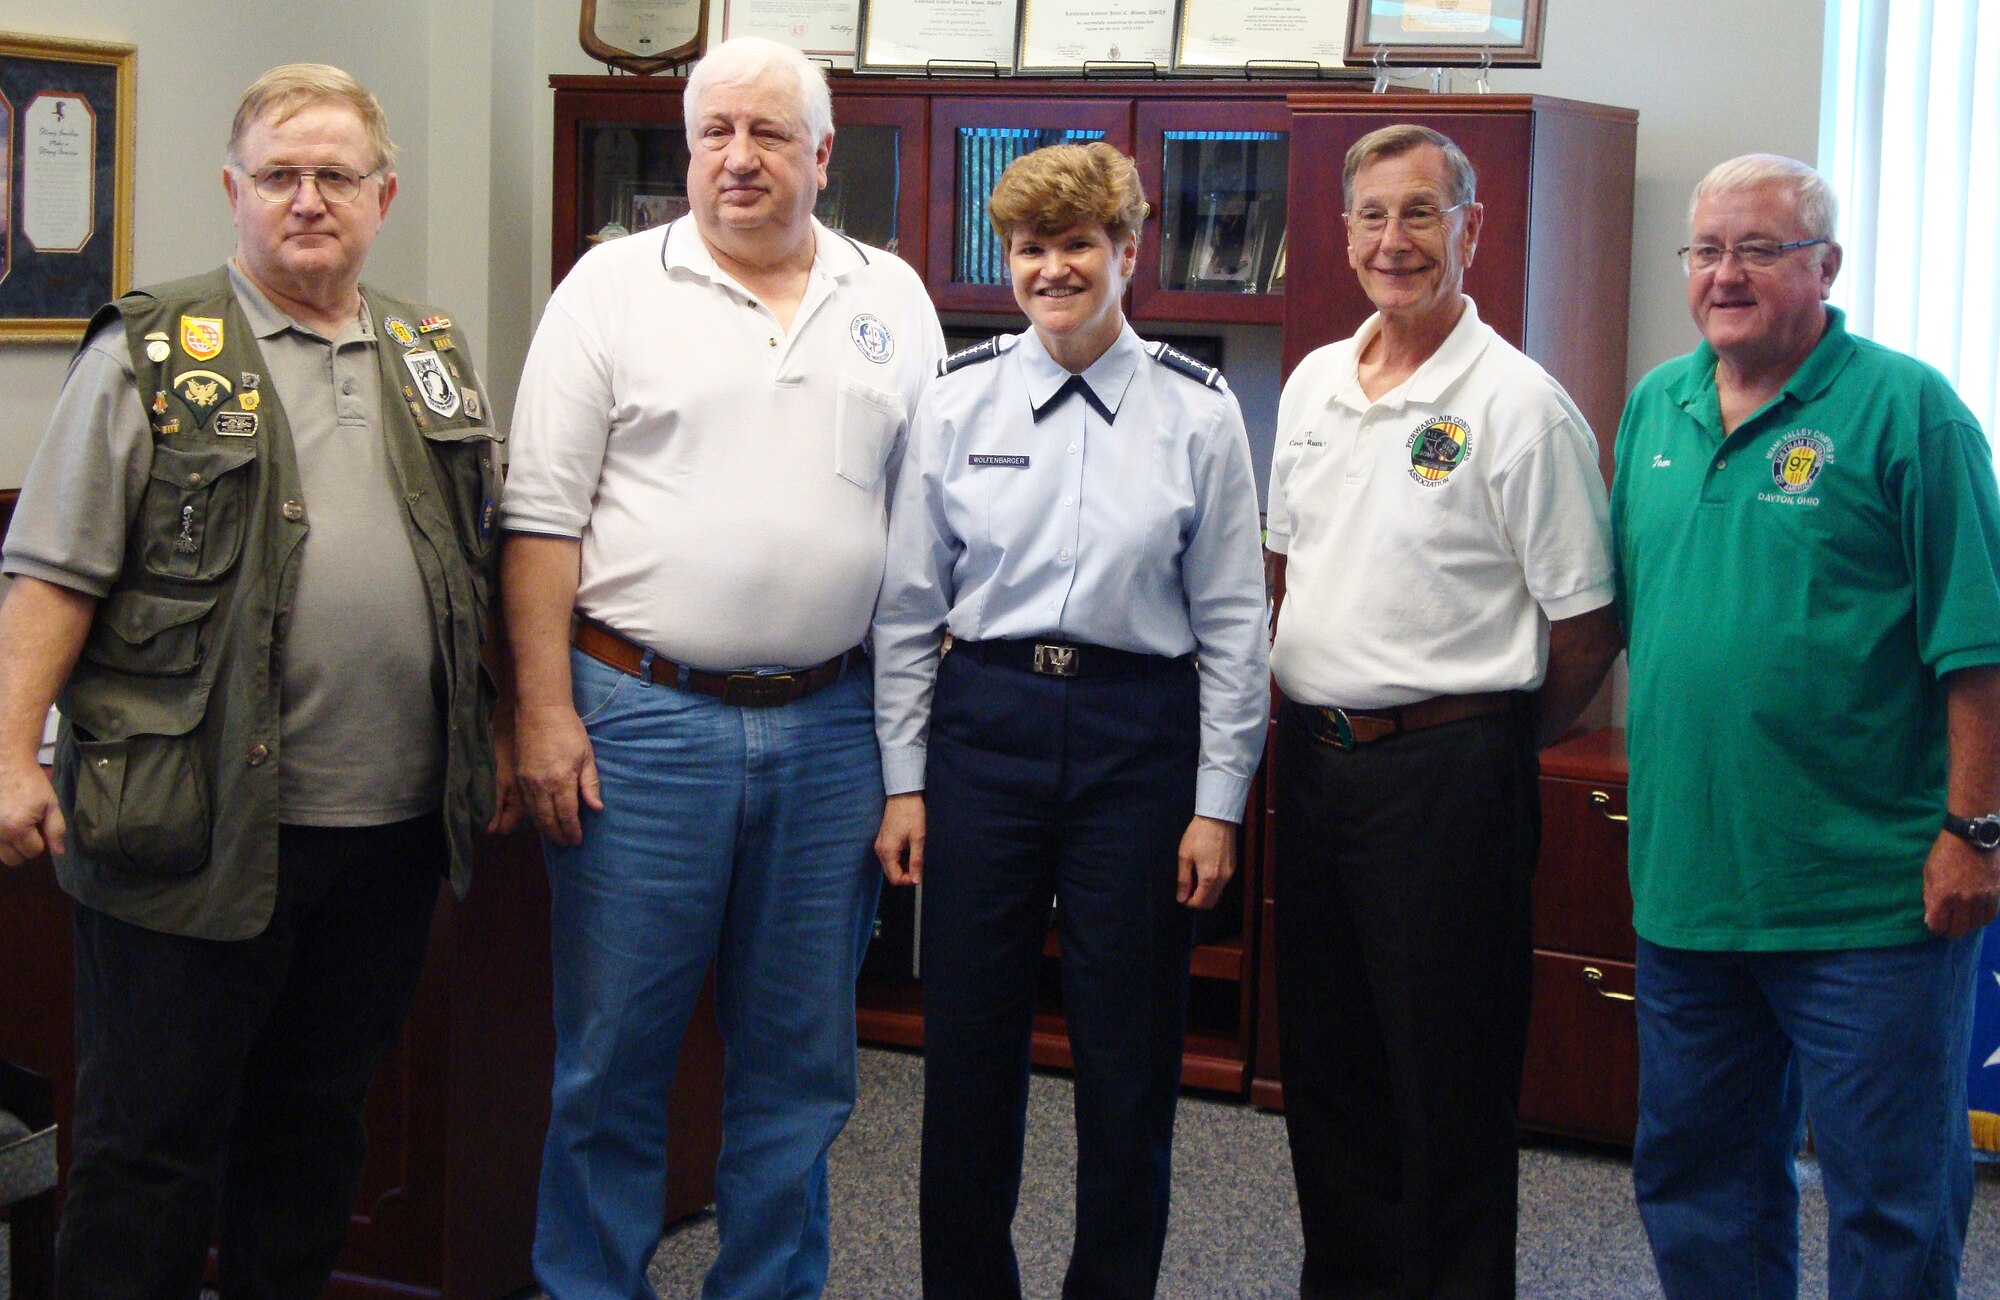 Gen. Janet Wolfenbarger, commander of Air Force Materiel Command, meets with a group of local Vietnam veterans on July 9, 2012.  (From left) David Fuchs, Steve Ratcliffe, General Wolfenbarger, Richard Barazzotto and Tom Istvan pose for a photo during the small gathering in the general’s office.  The veterans are four of the five who were selected to participate in the 2012 AFMC Freedom’s Call Tattoo ceremony.  General Wolfenbarger invited the group to meet with her following the cancellation of the event due to severe weather.  The theme of this year’s Tattoo was “Service, Honor and Sacrifice” and was intended to commemorate the veterans who served their country during the Vietnam War.  According to Tattoo Director Dave Egner, plans are already in progress to make their service a centerpiece of the next Tattoo.  (U.S. Air Force photo/Michelle Martz)